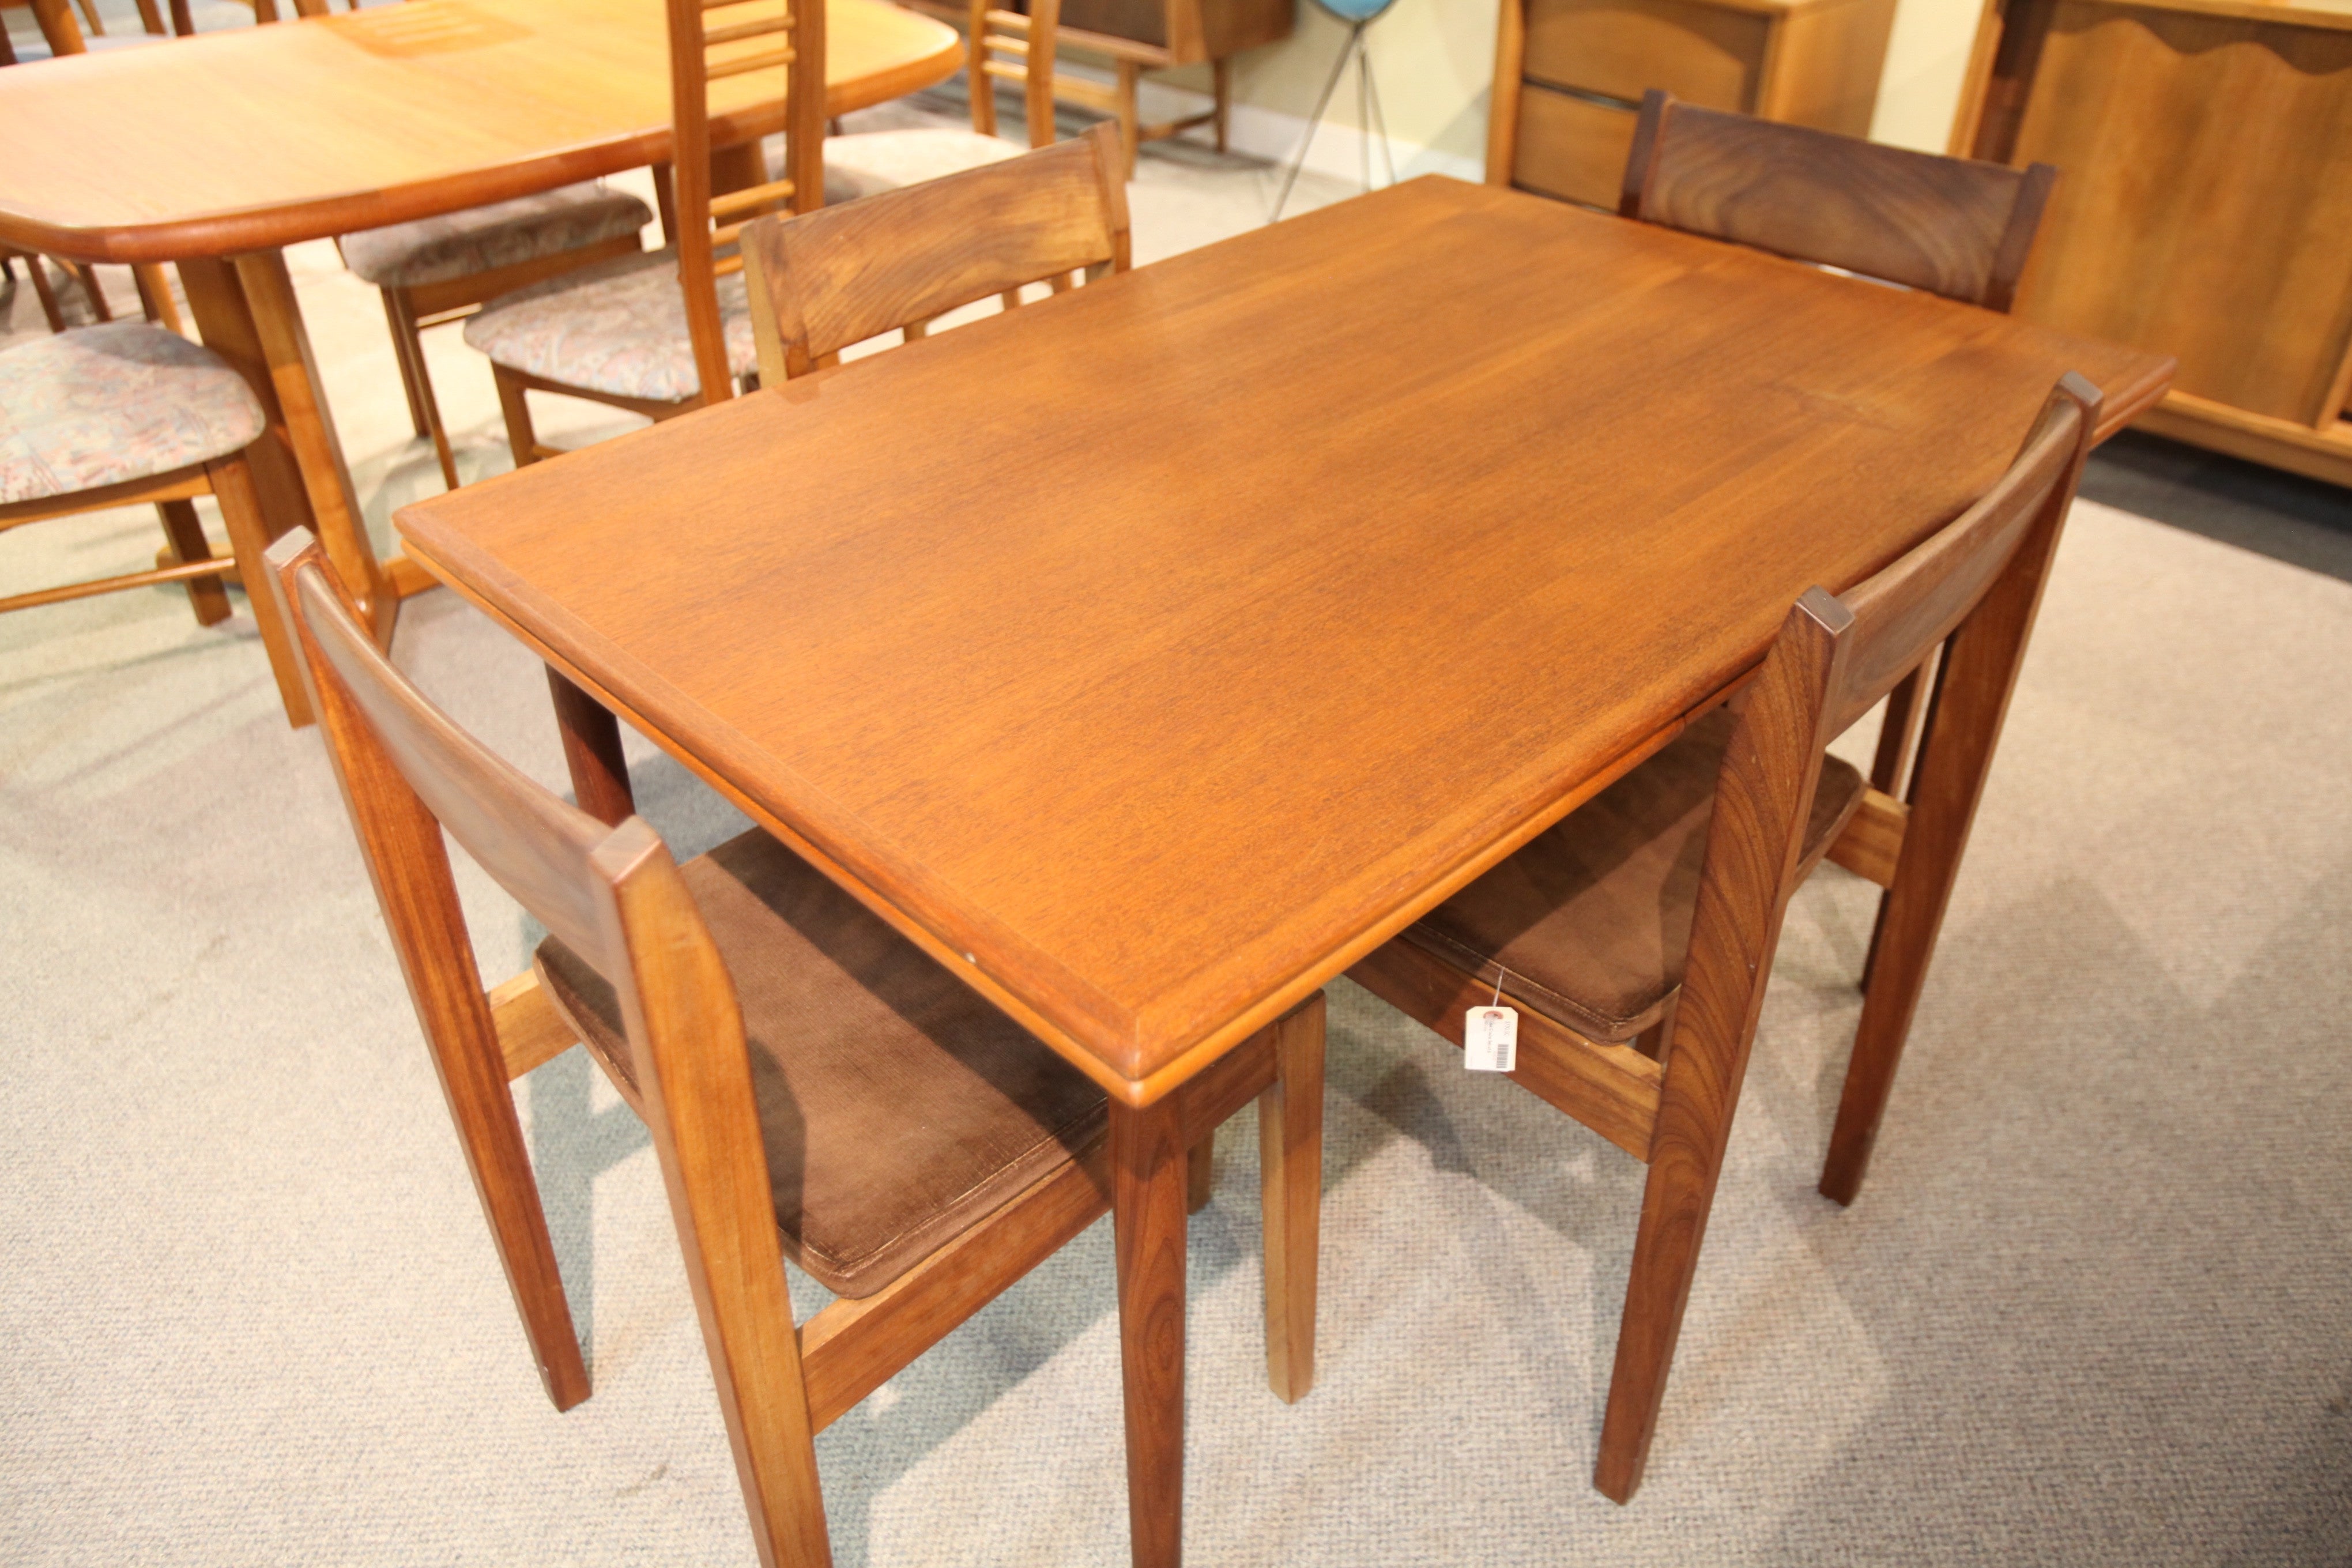 Teak Extension Table (85x32.5) or (48"x32.5") (Small imperfection on surface)